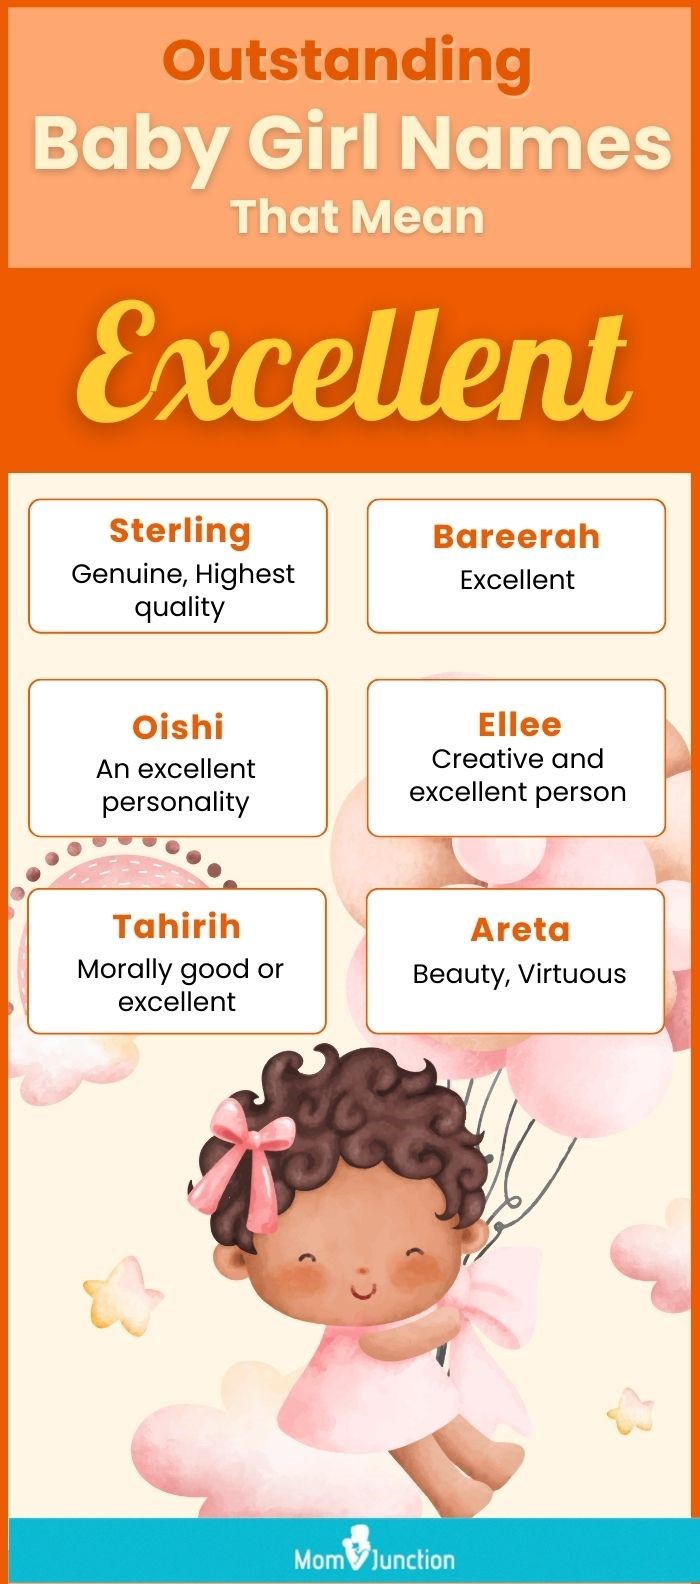 Outstanding Baby Girl Names That Mean Excellent (infographic) 